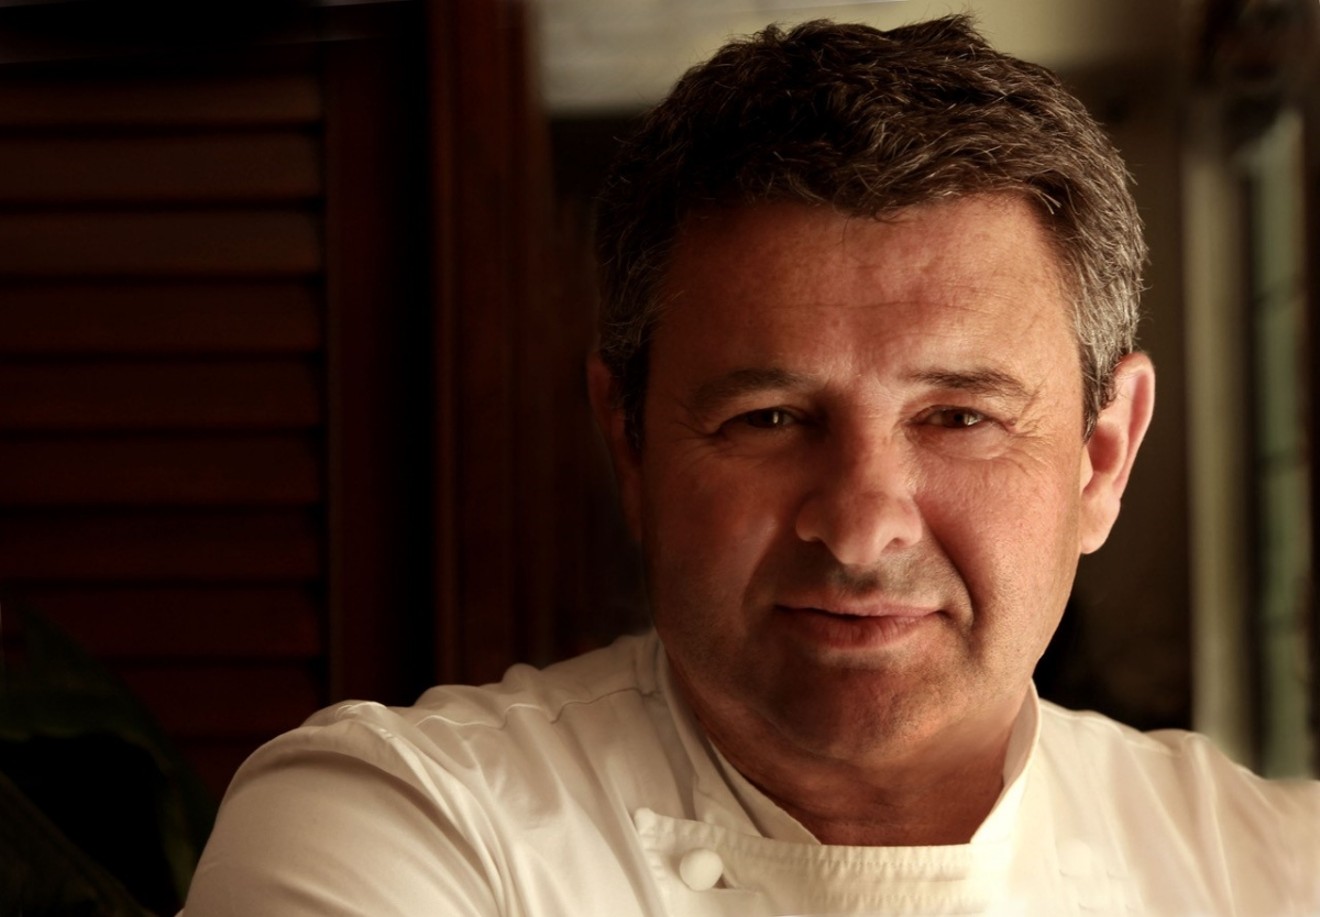 Chef Laurent Tourondel will helm the kitchen at Dune by Laurent Tourondel.